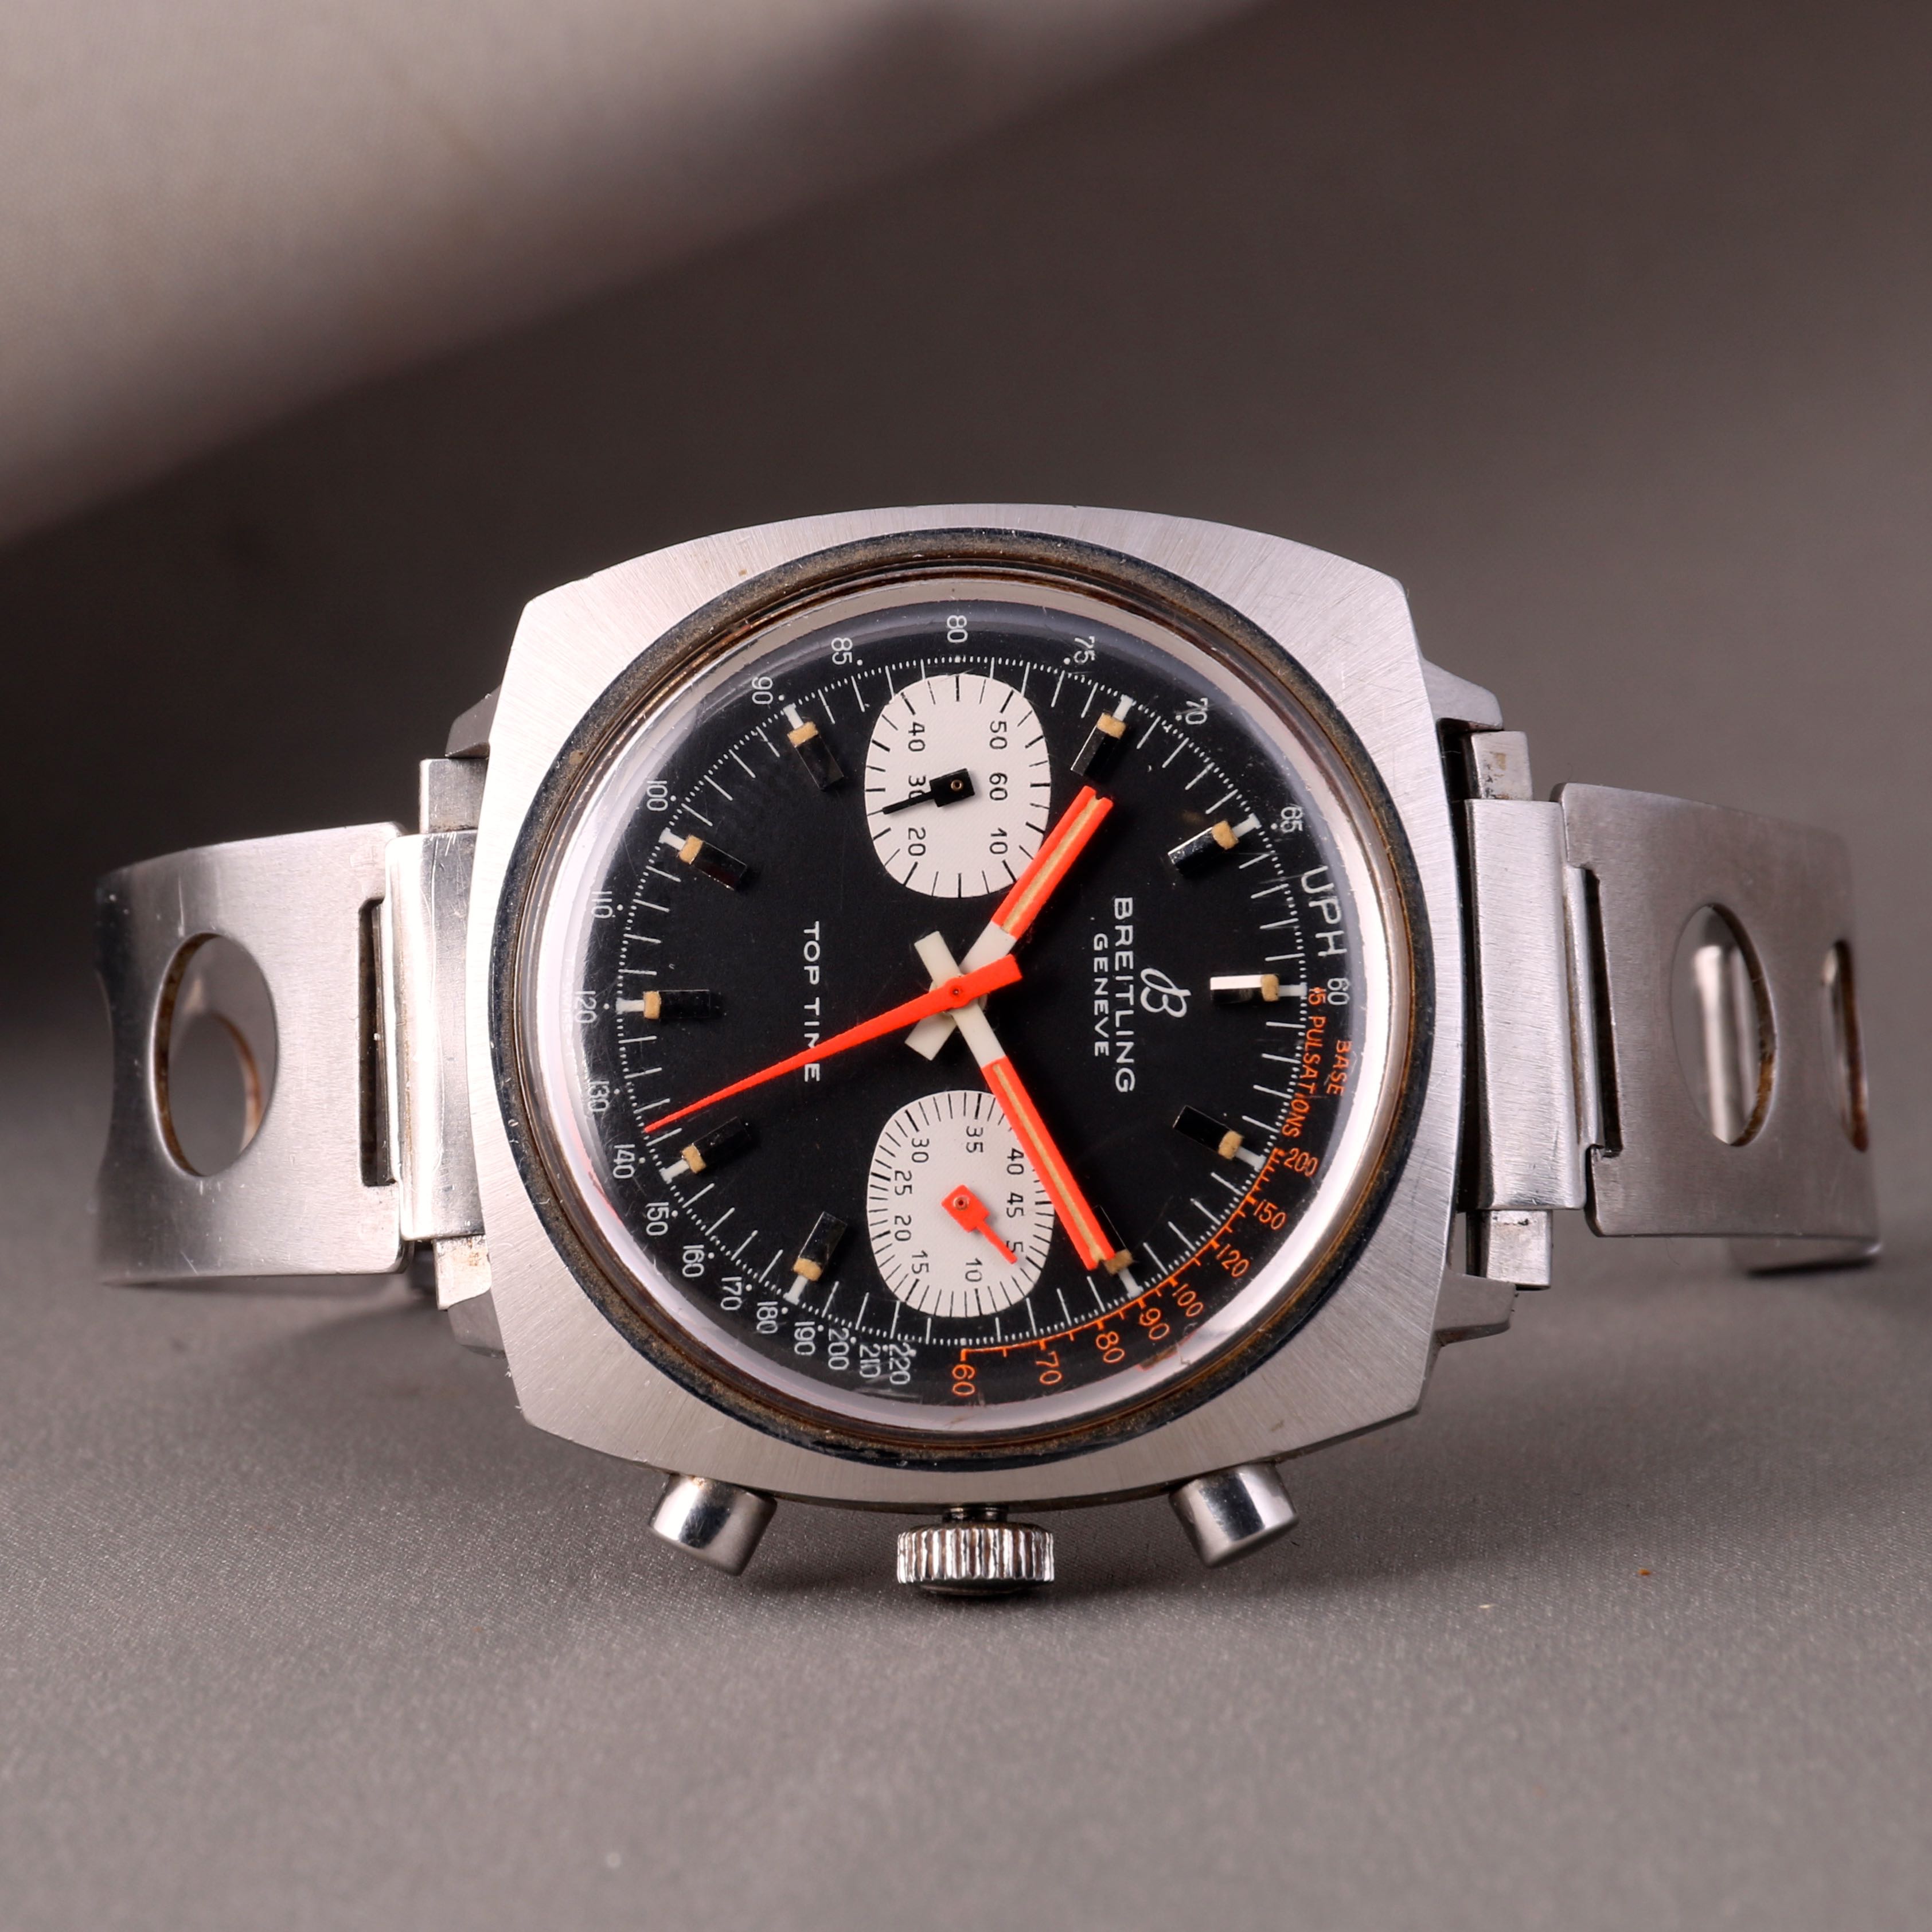 Breitling Top Time ref 2211 Rally style 1970 - Vintage Breitling 